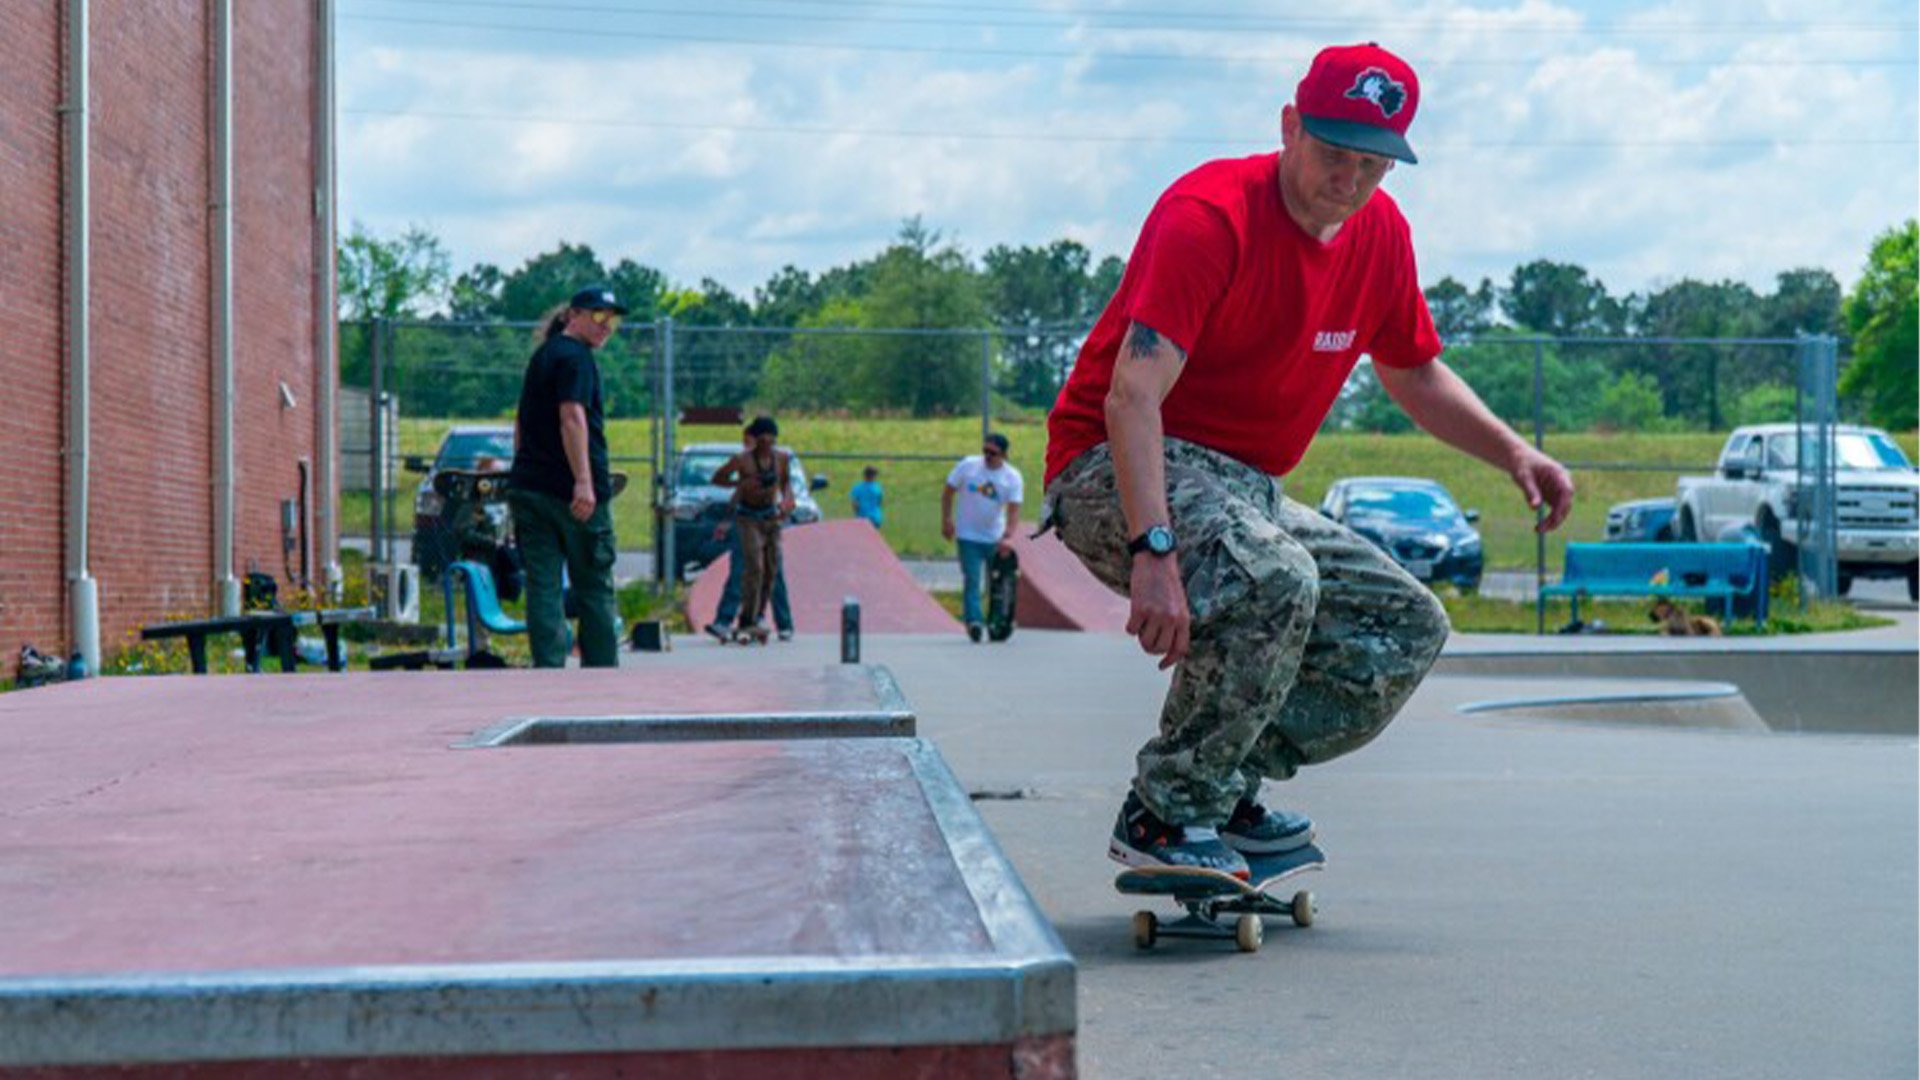 US Army Sgt. 1st Class Adam Klakowicz loads up for a nose grind in Ft. Bragg's skate park on April 23, 2022. Joshua Skovlund/Coffee or Die Magazine. 